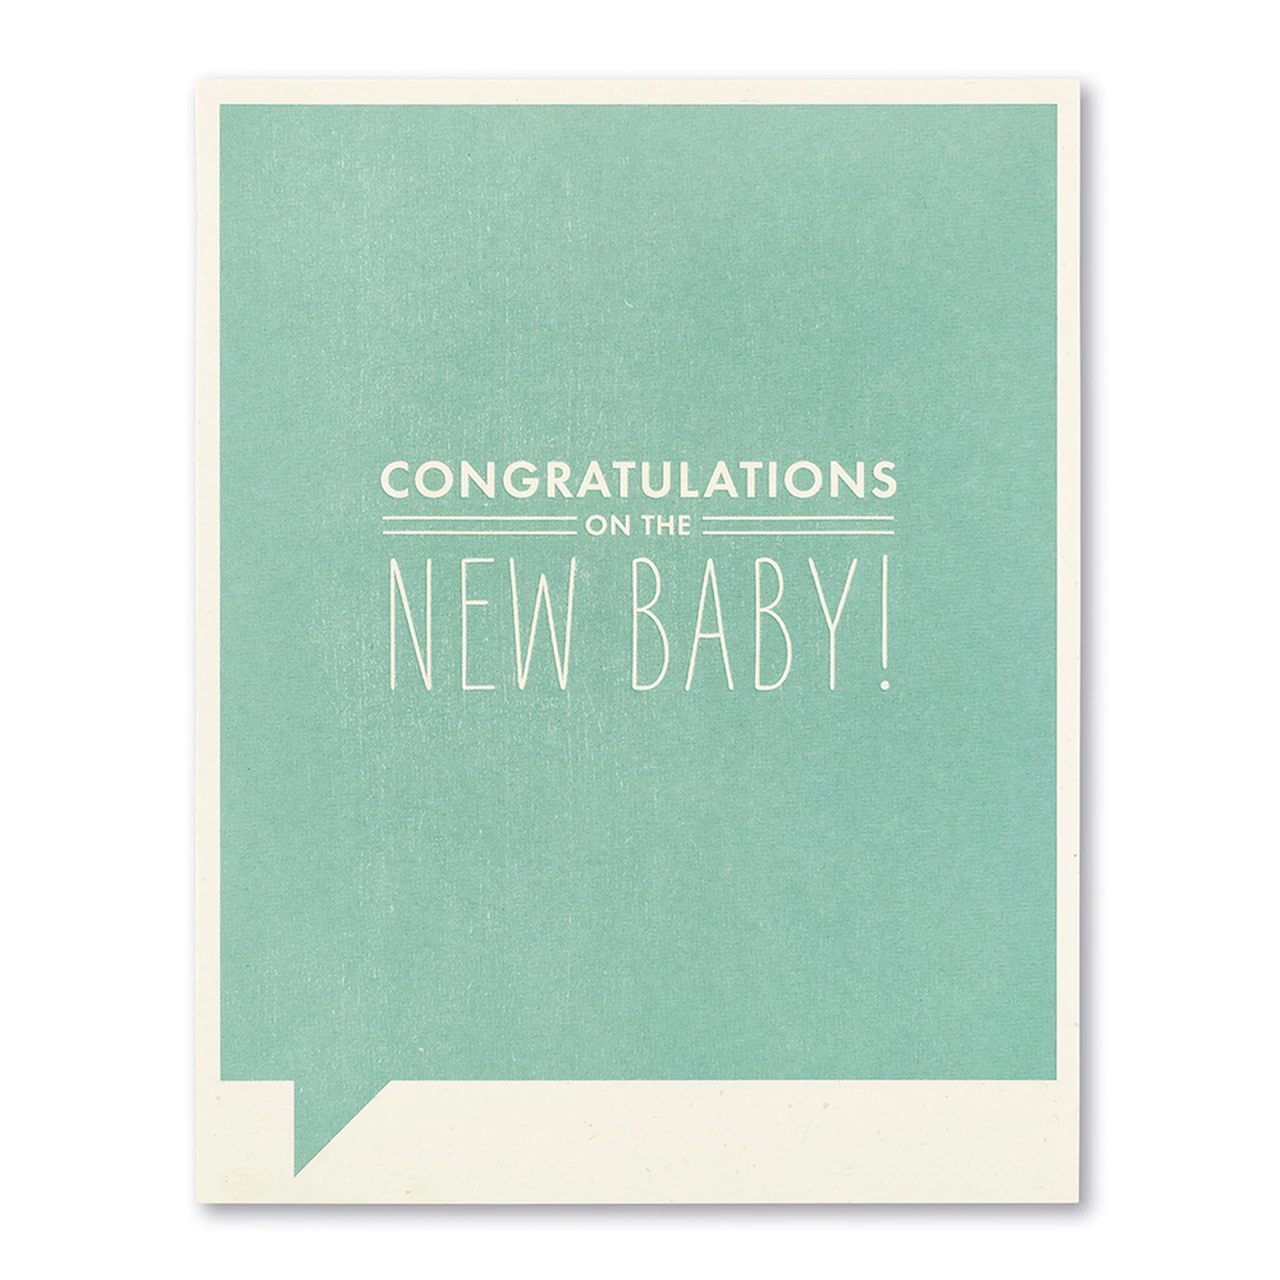 New Baby Greeting Card - Congratulations on the New Baby!